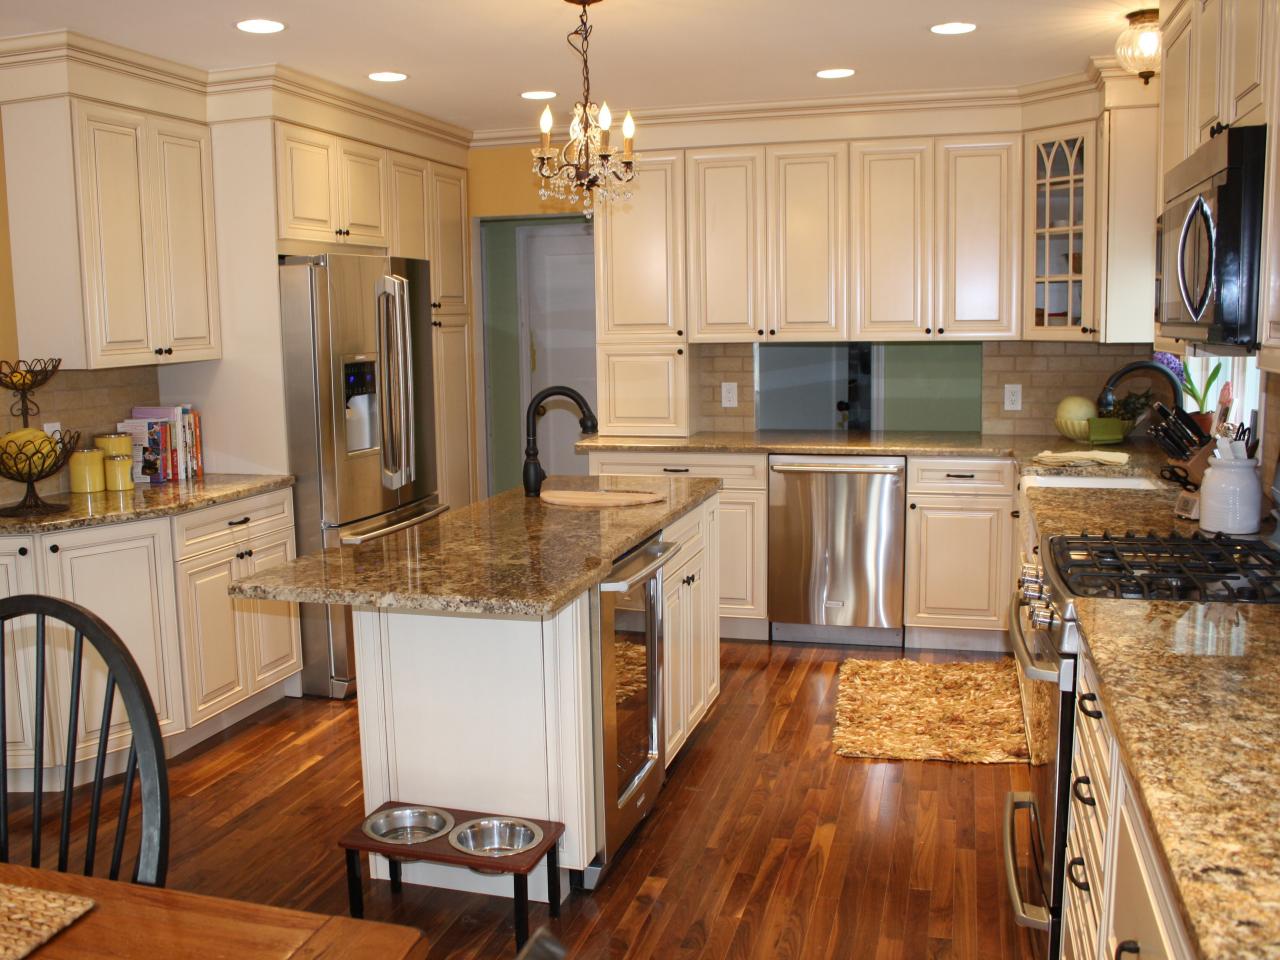 Kitchen Remodel Ideas On A Budget / See what this kitchen looks like ...